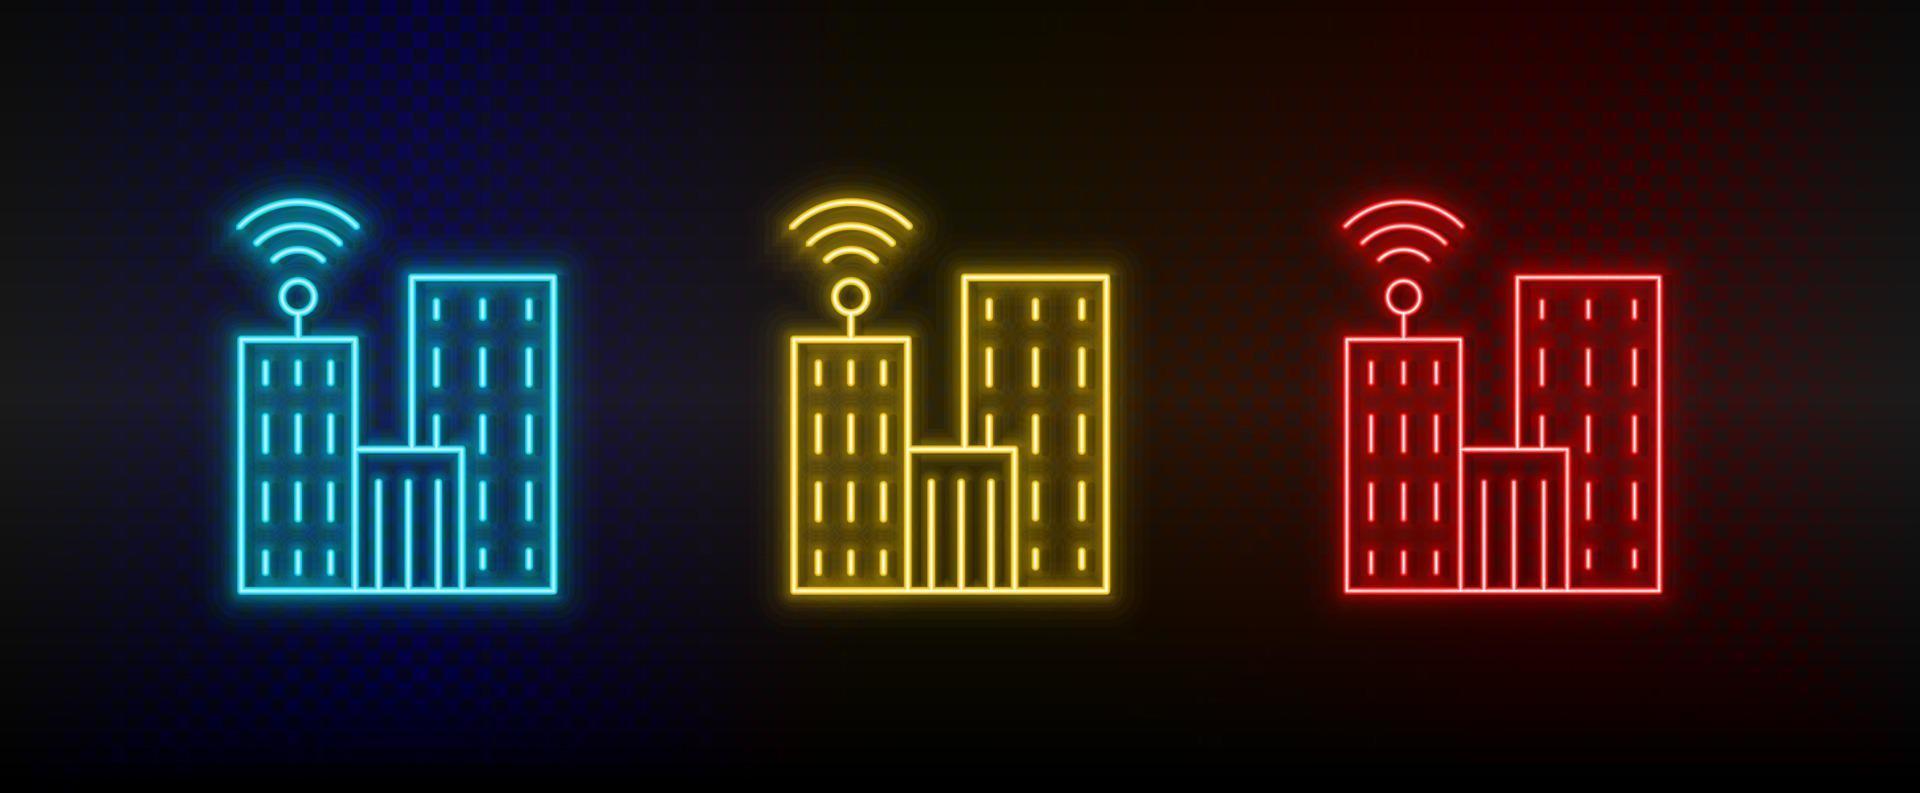 Neon icons. communication television building. Set of red, blue, yellow neon vector icon on darken background